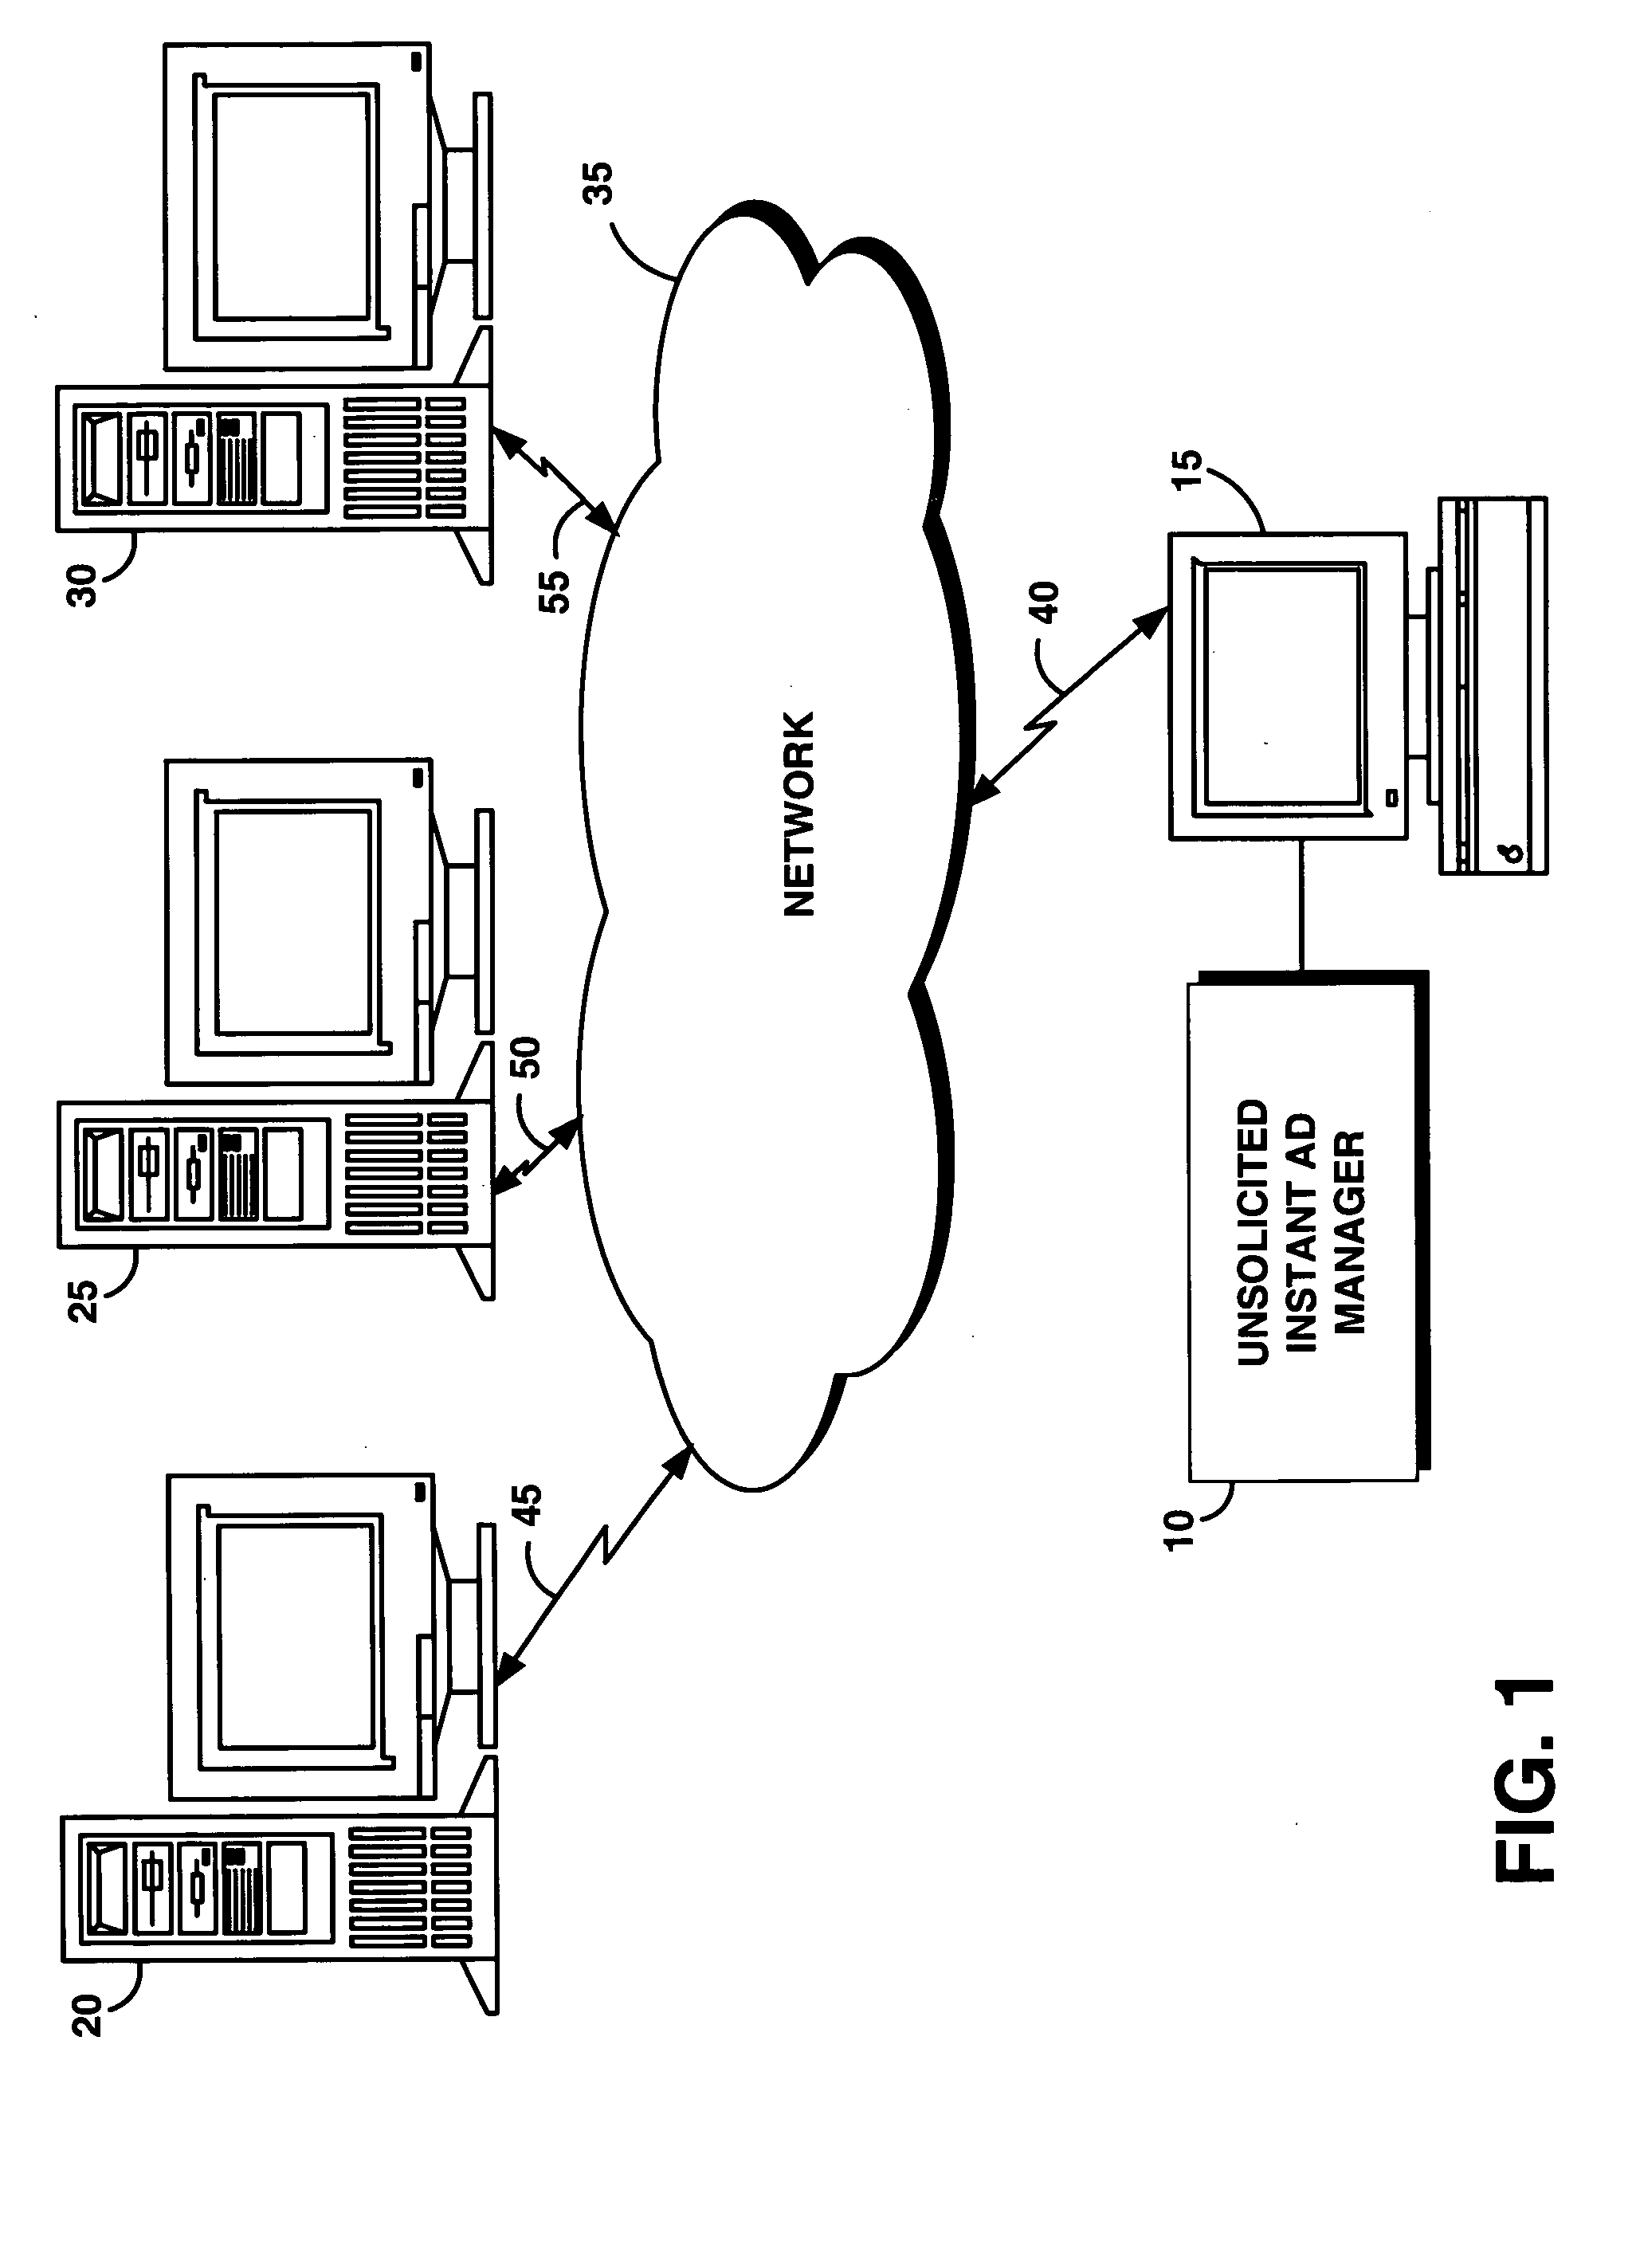 System and method for managing the display of unsolicited instant web advertisements